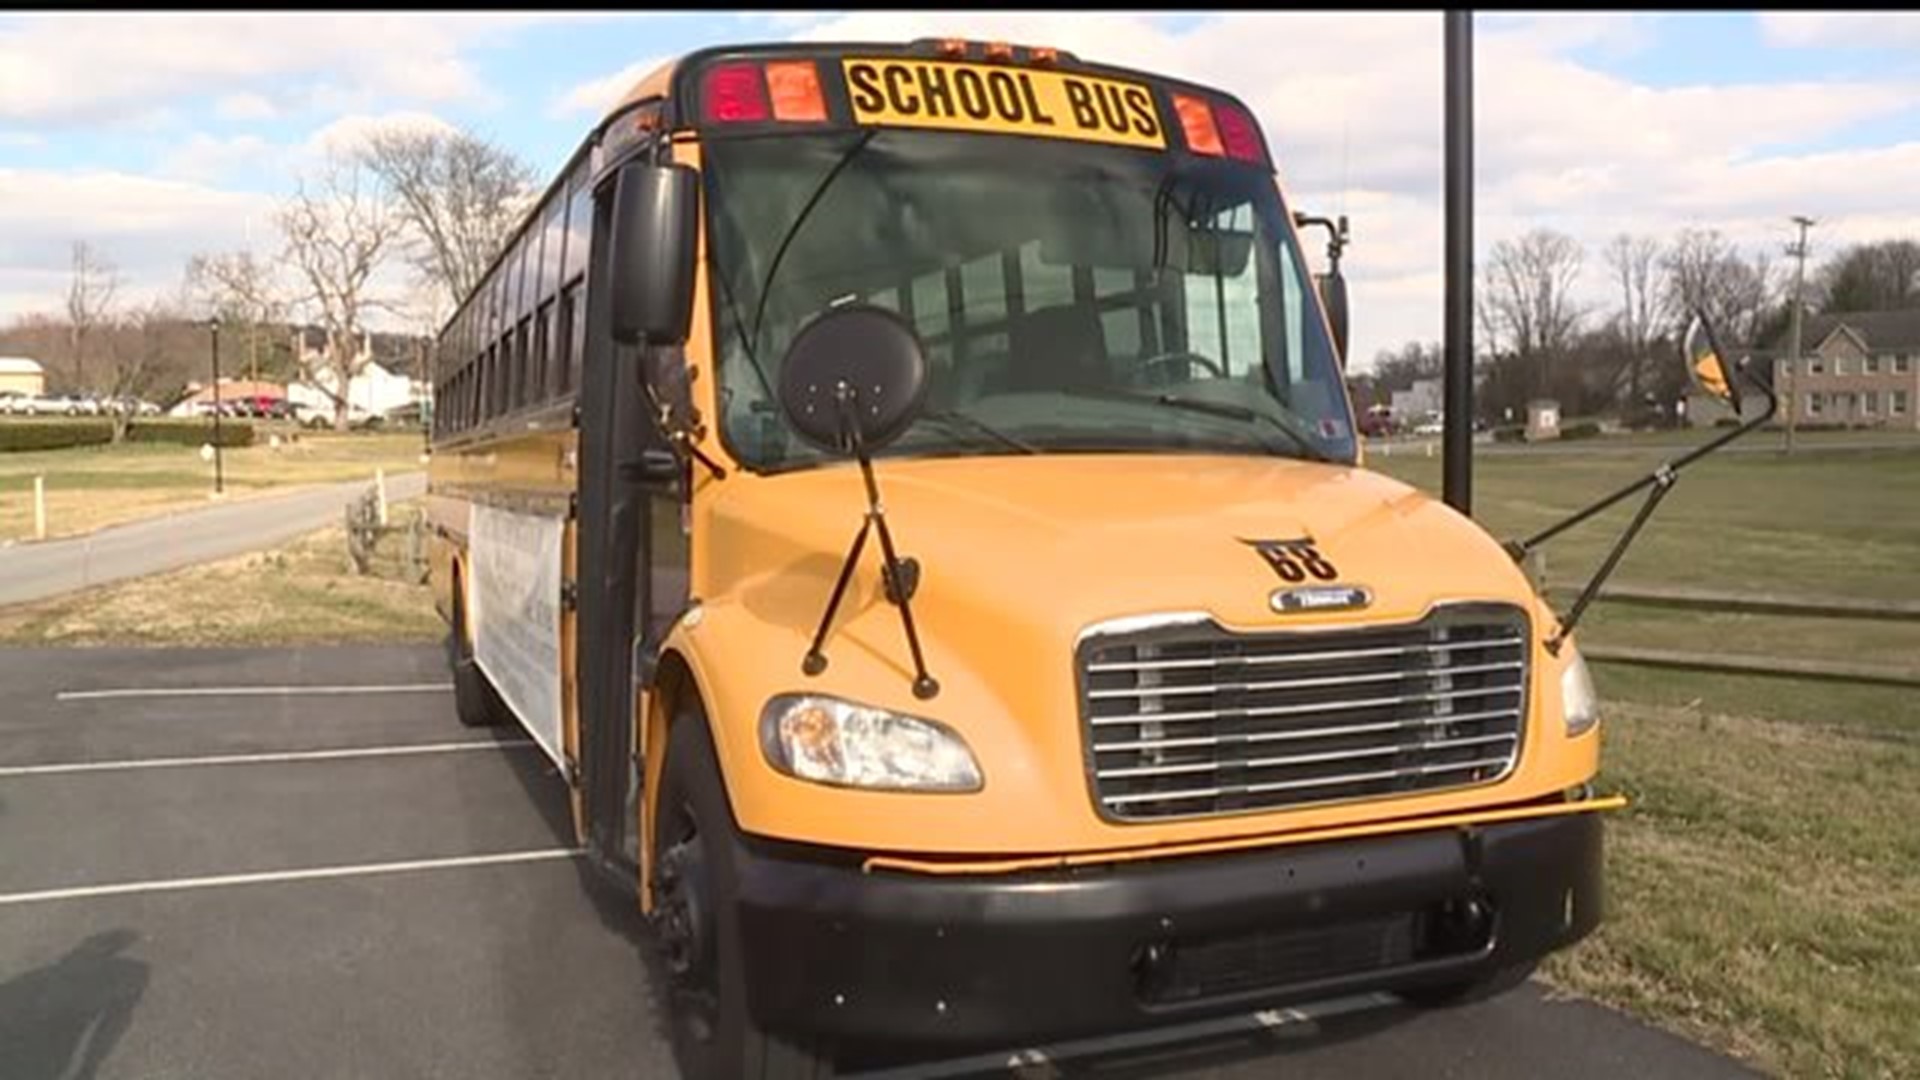 Stuff the bus event being held in York County